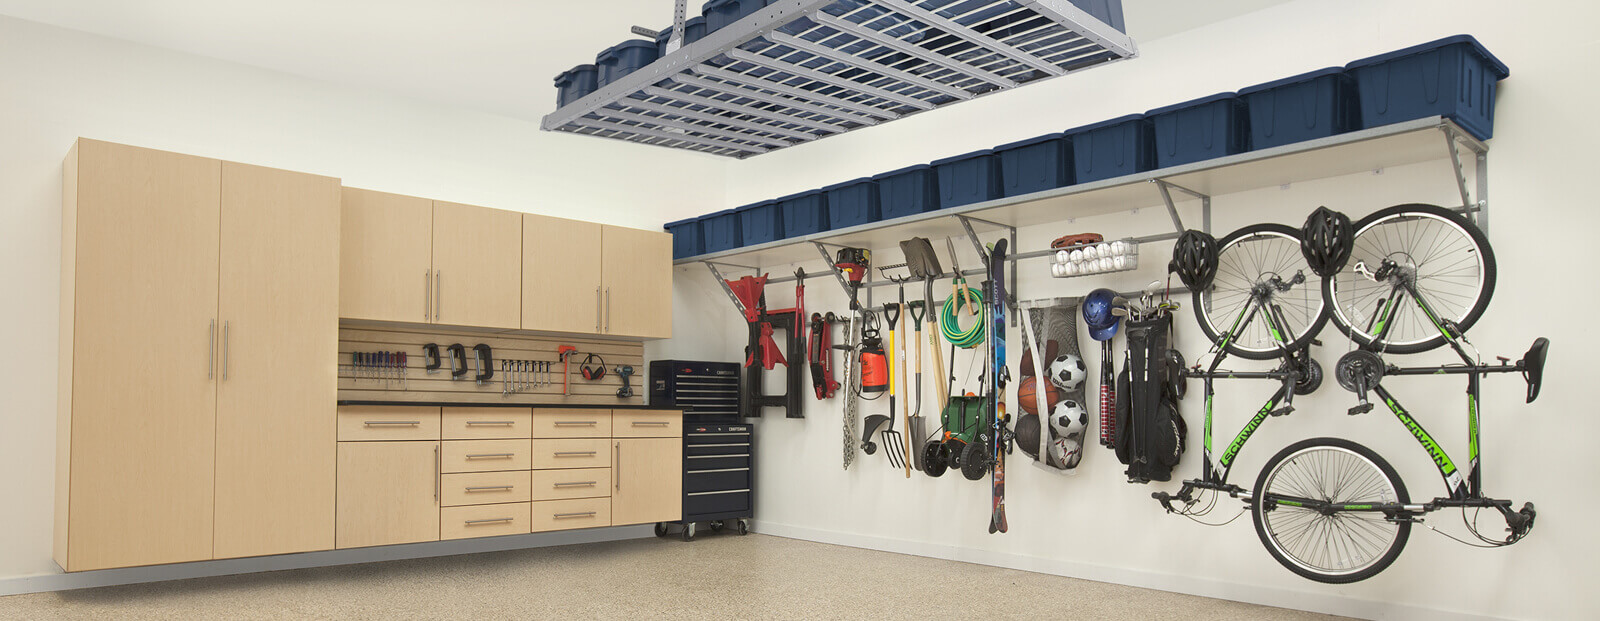 Garage Cabinets & Storage Systems at